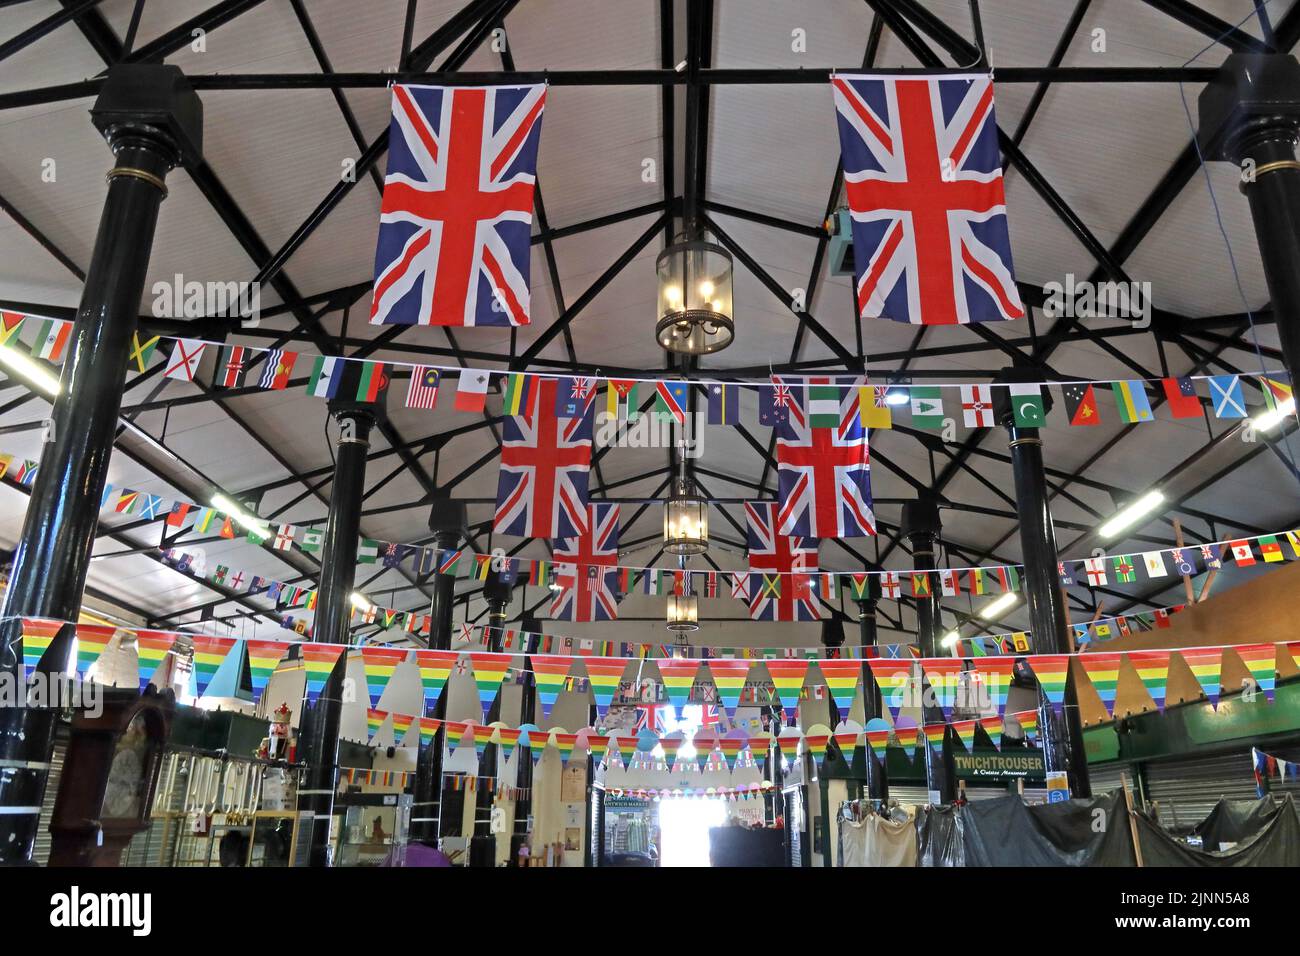 Interior of Nantwich Market, Market Street, Nantwich, Cheshire, England, UK, CW5 5DG, flags for the queens jubilee 2022 Stock Photo